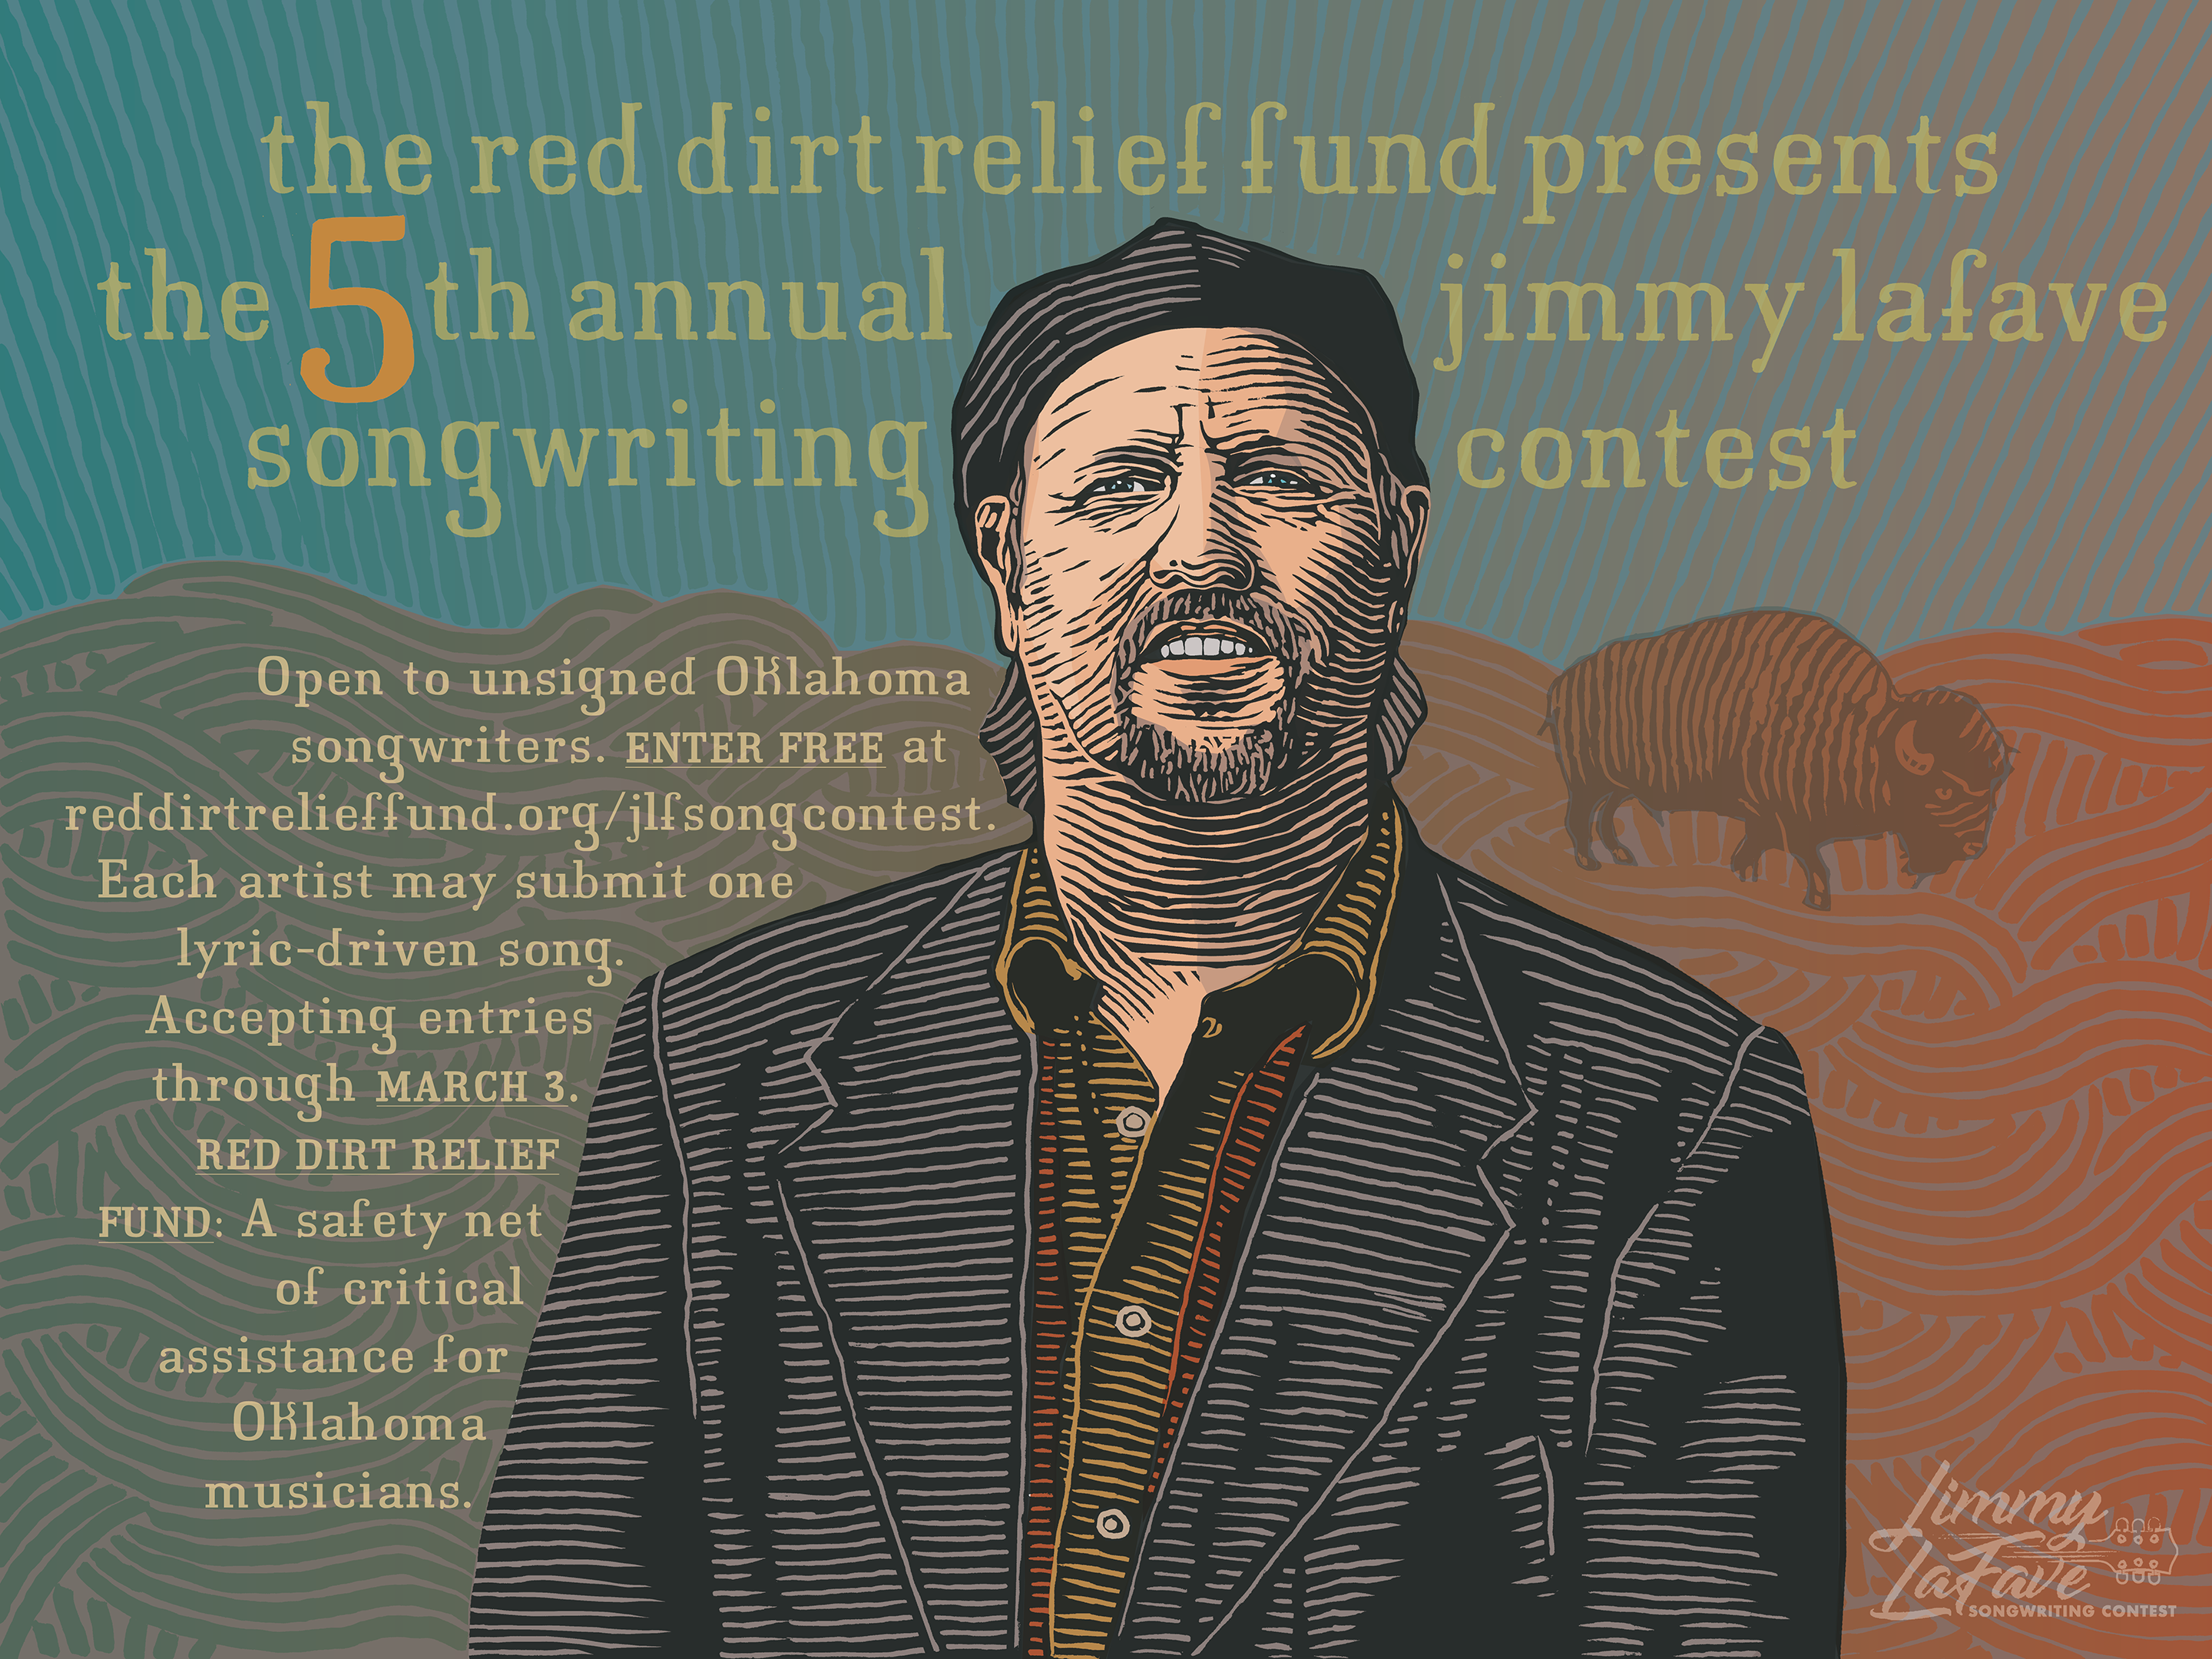 poster for the jlf song contest with the red dirt relief fund